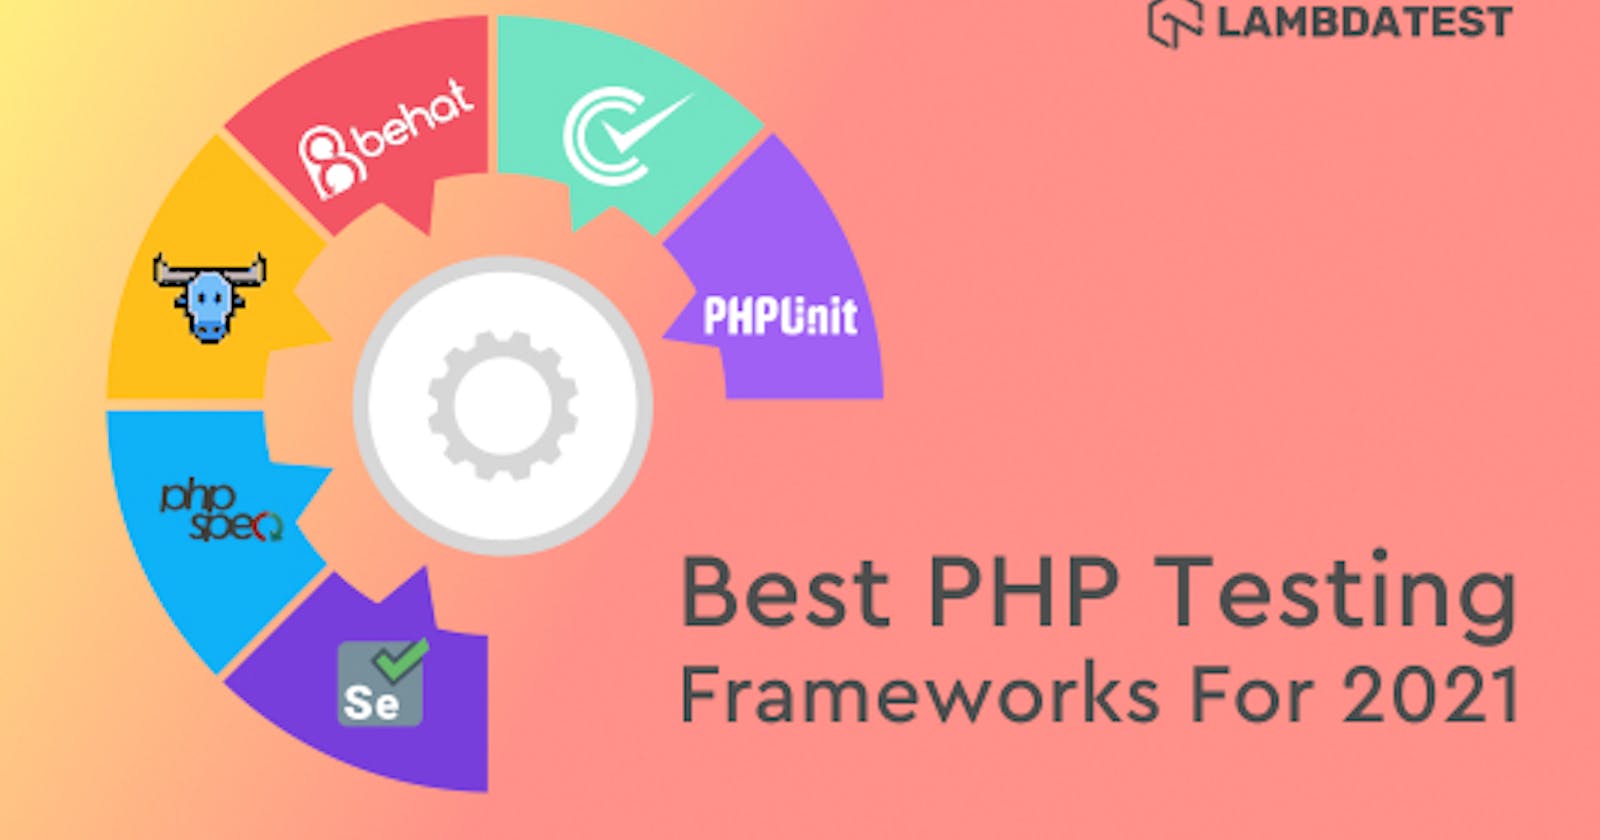 10 Of The Best PHP Testing Frameworks For 2021